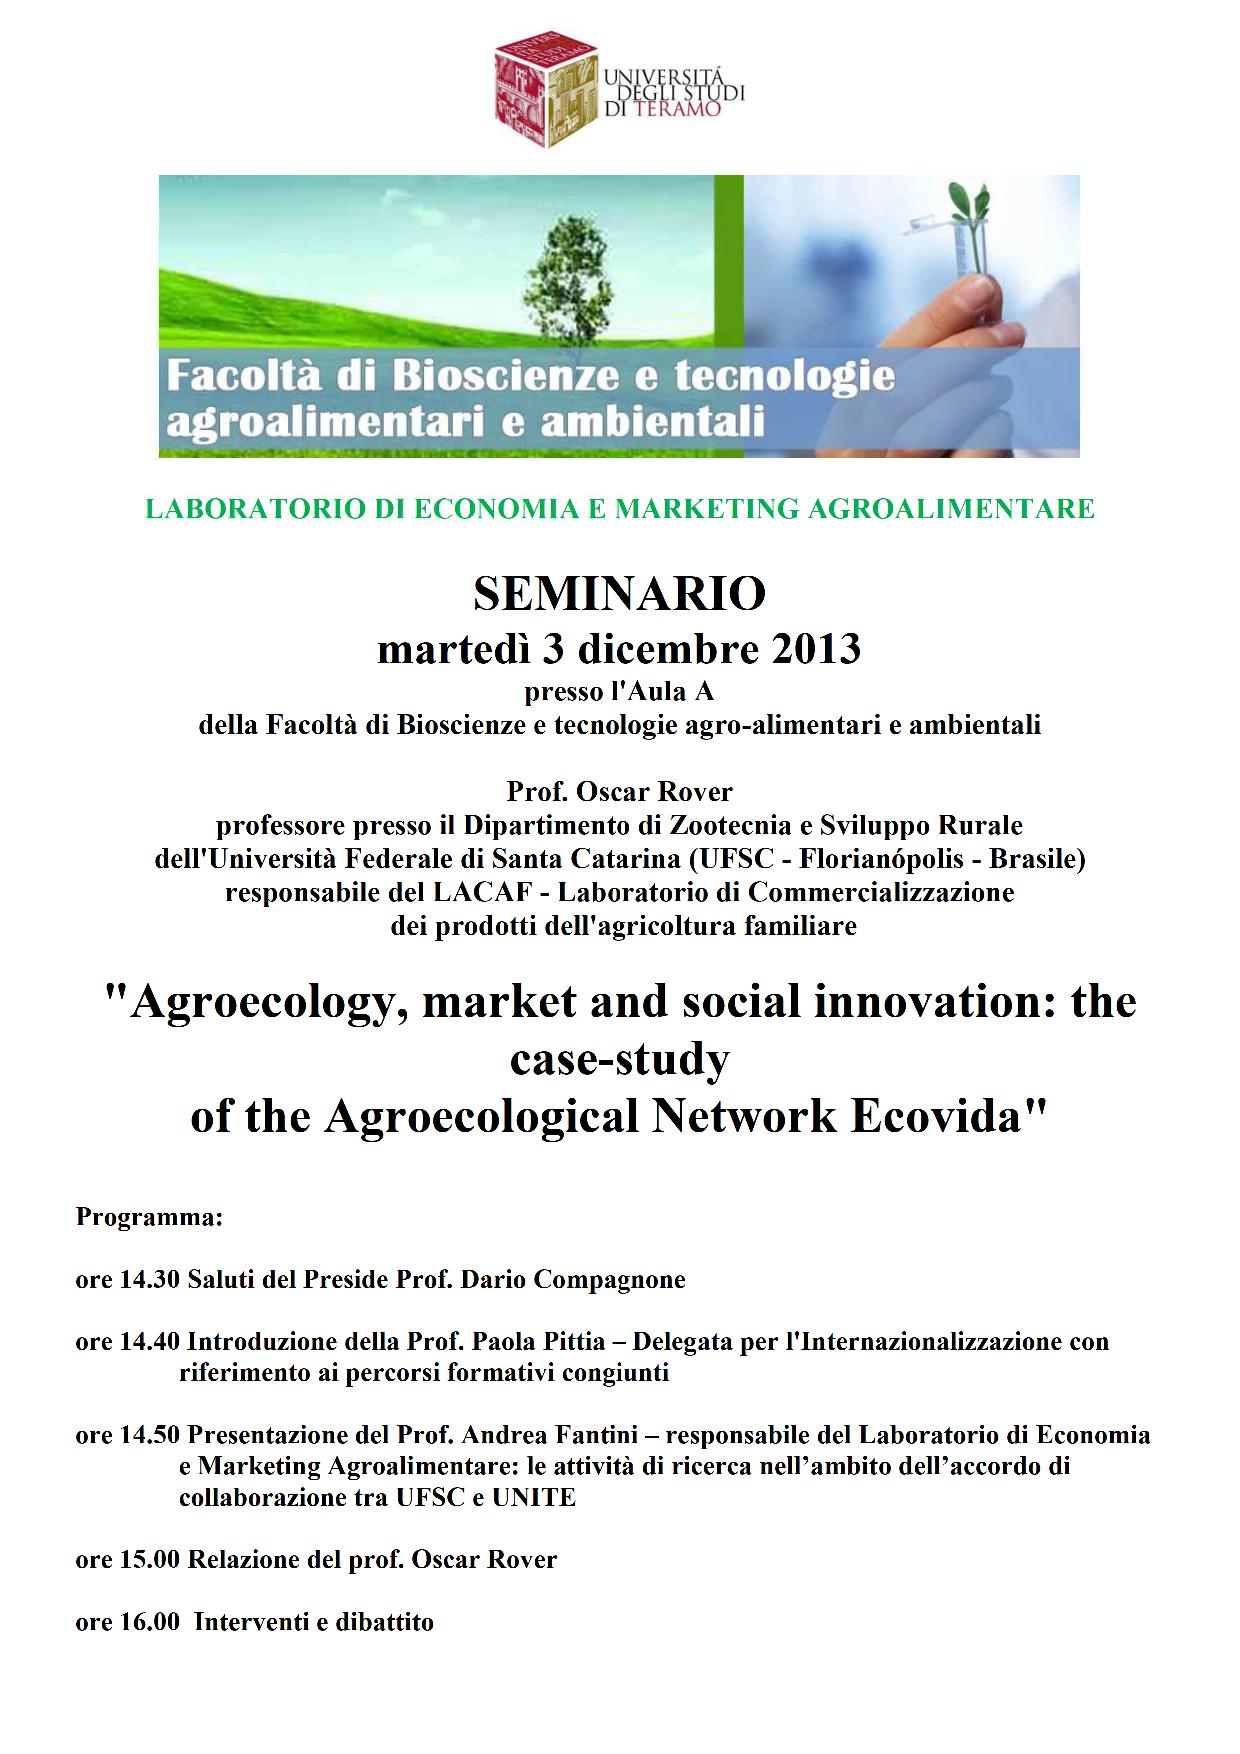 Agroecology, market and social innovation: the case-study of the Agroecological Network Ecovida